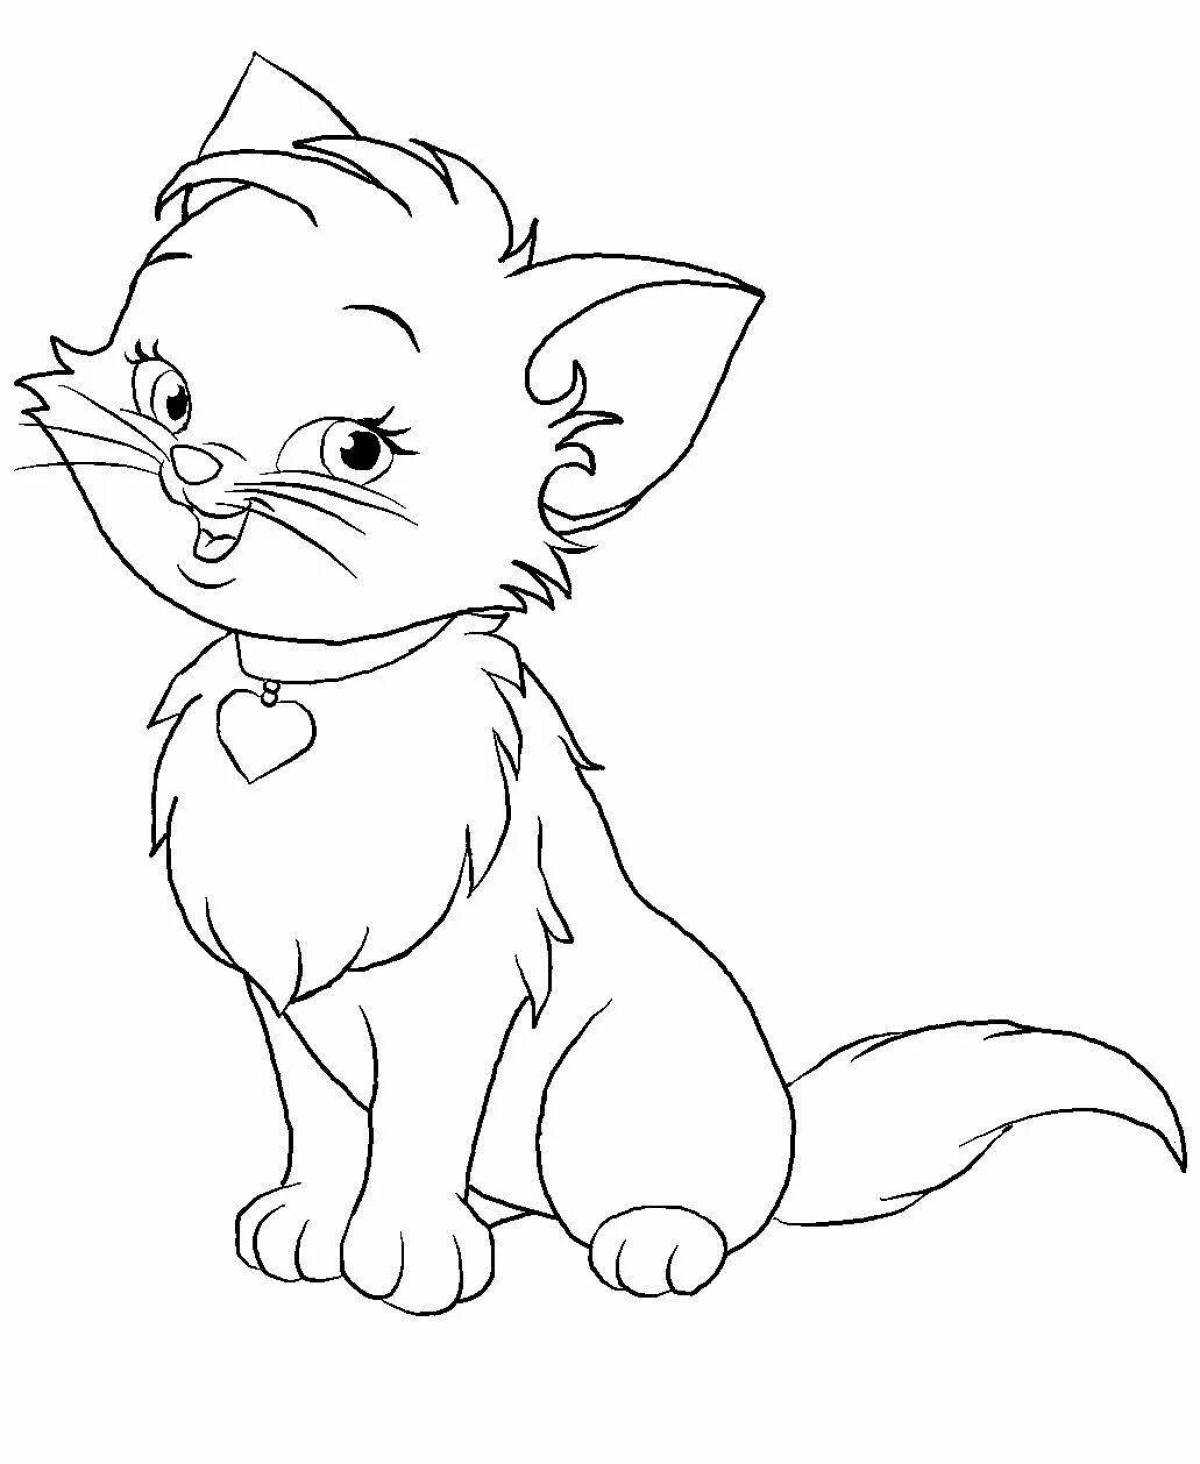 Silly cat coloring page